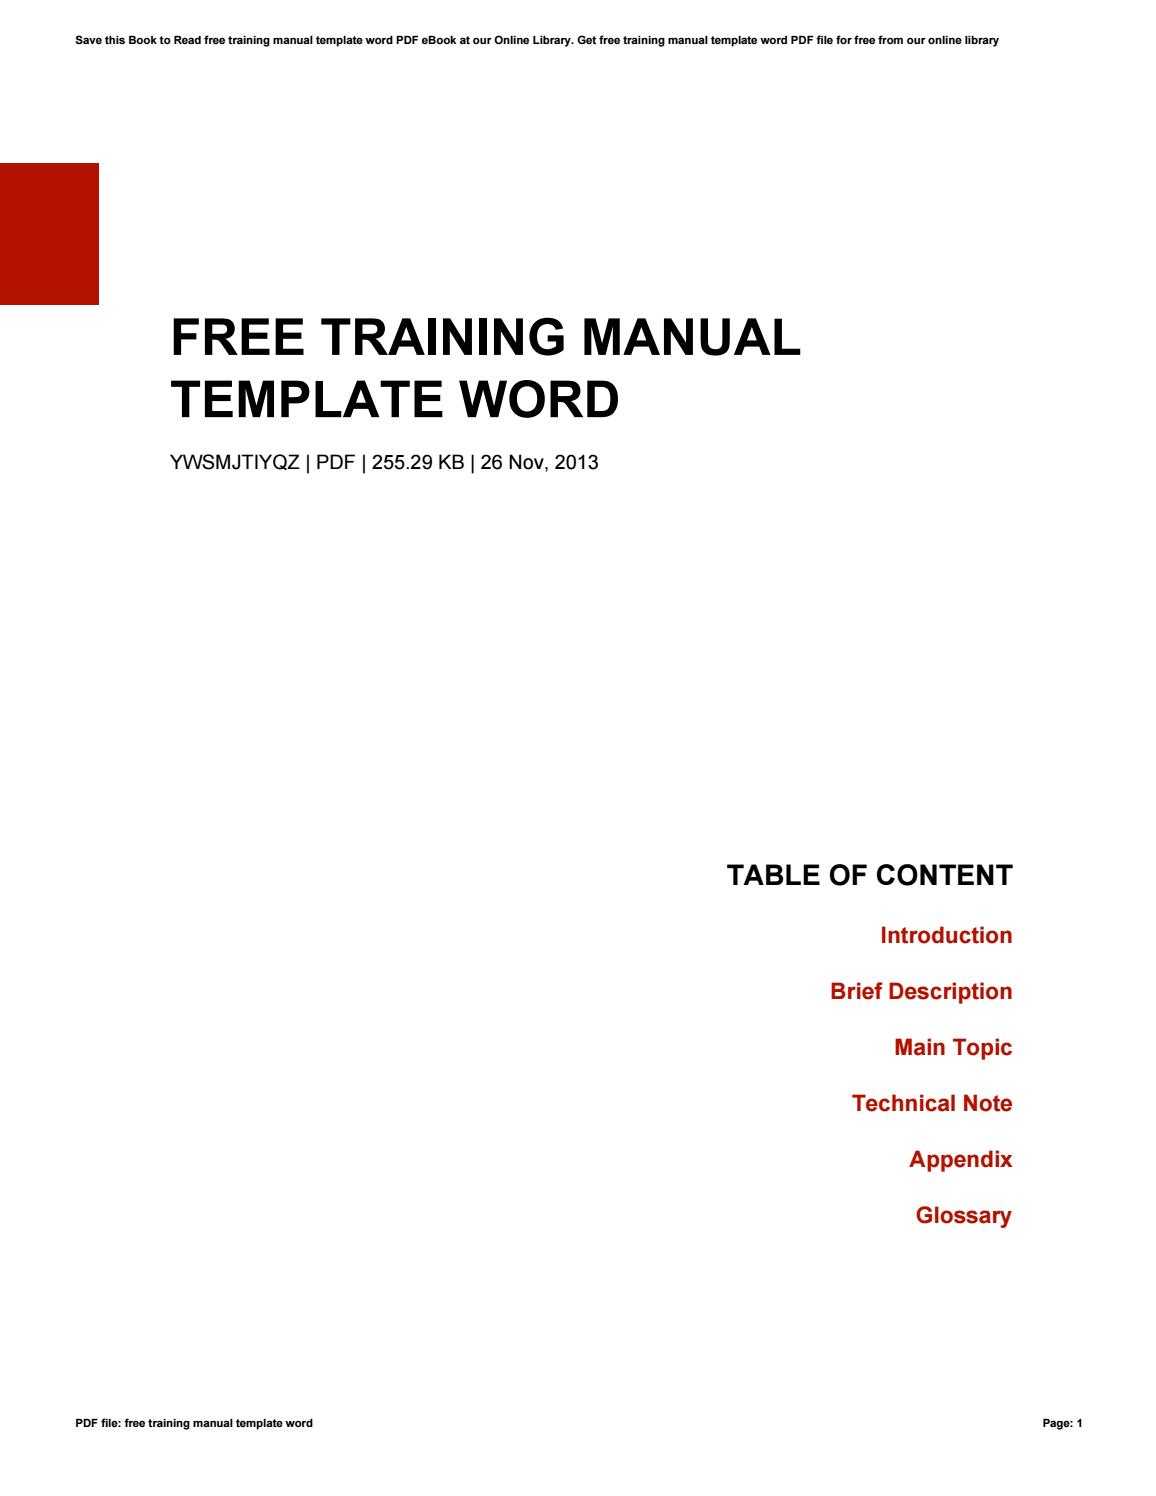 documentation template word With Regard To Training Documentation Template Word